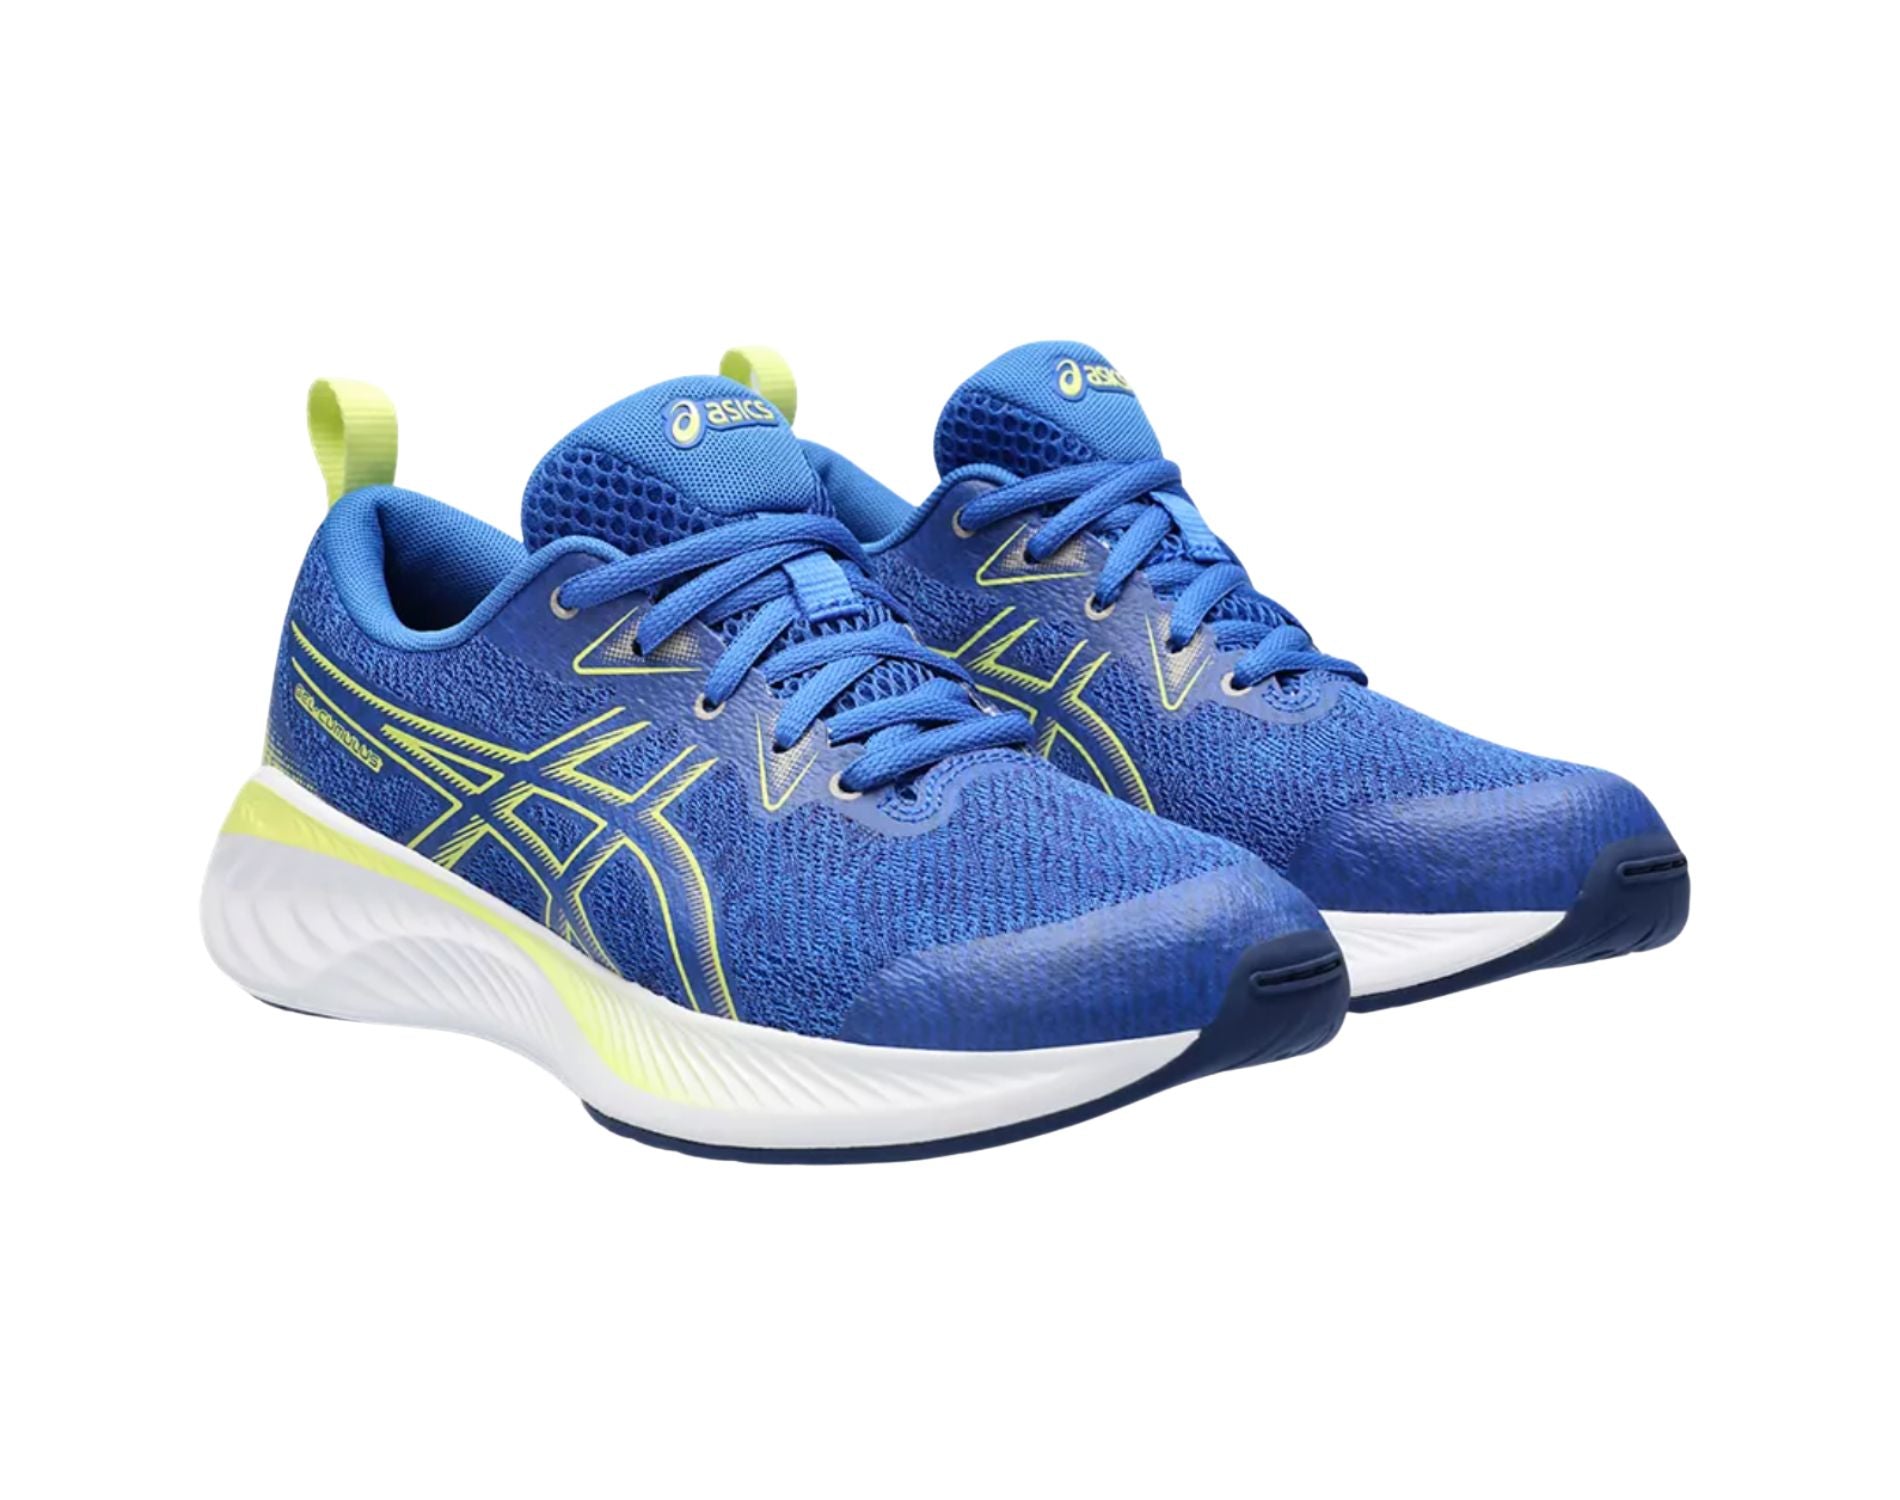 Asics Cumulus 25 GS boys sports shoes in illusion blue glow yellow colour